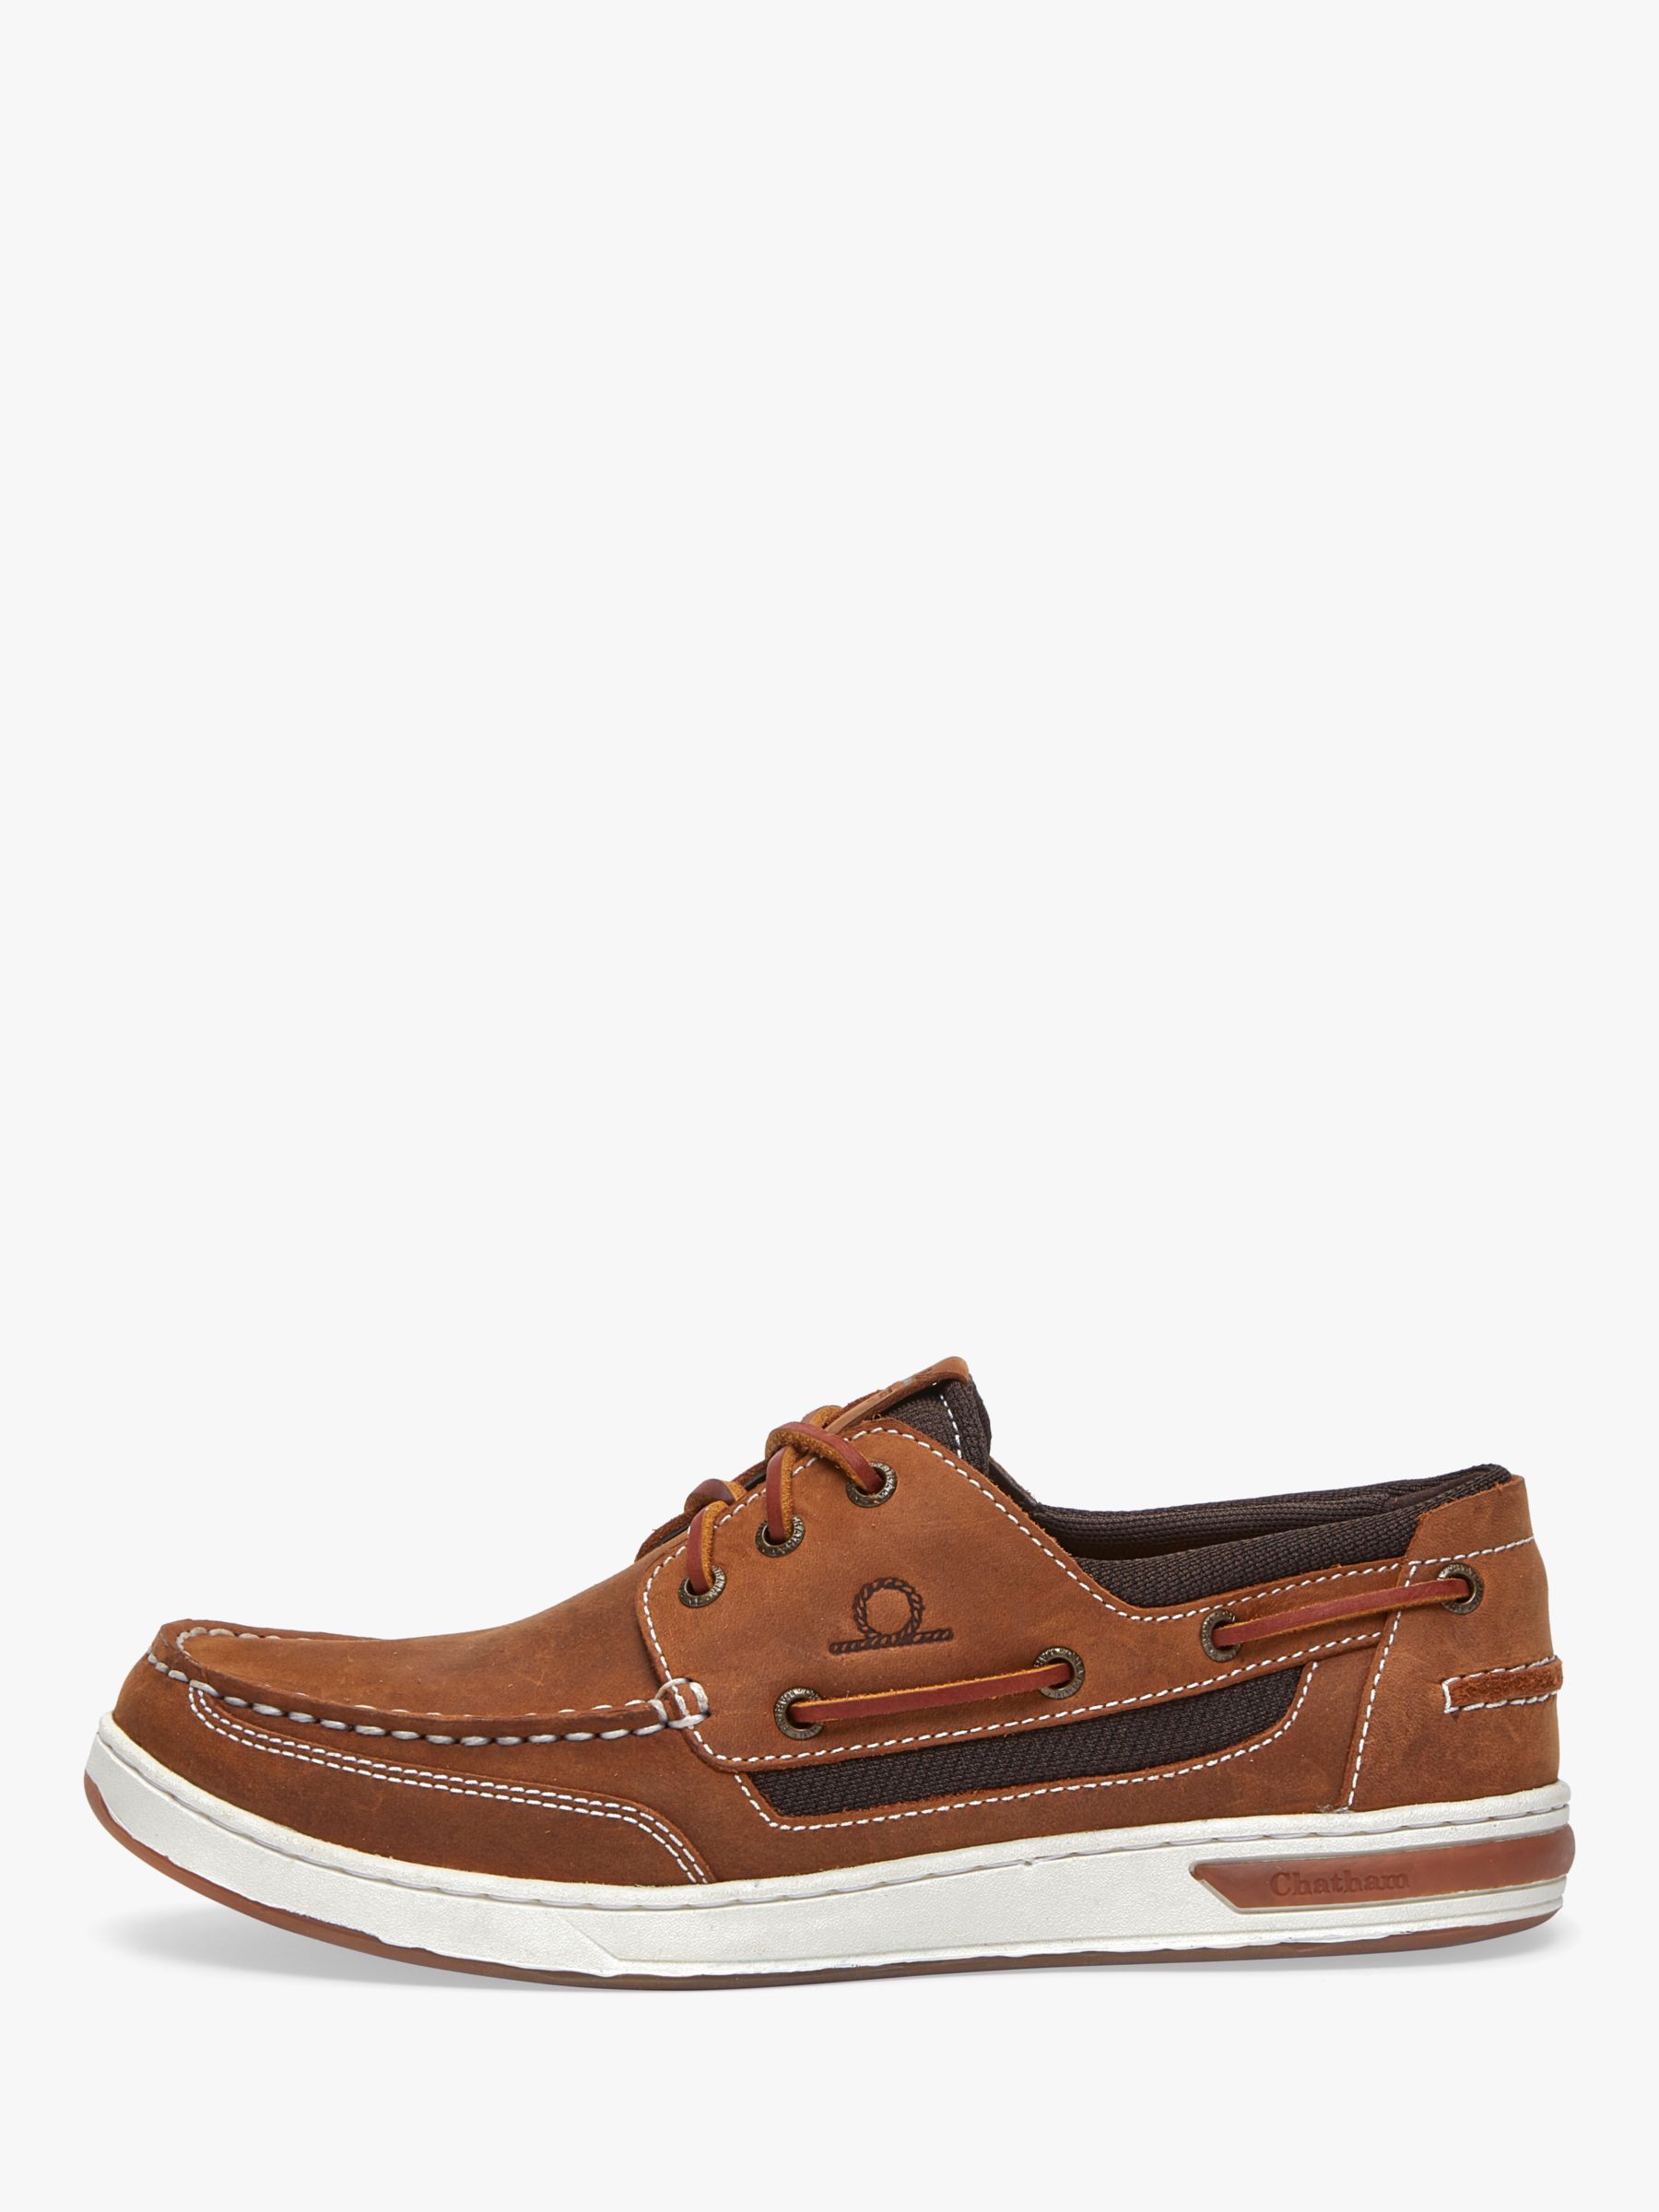 Chatham Buton G2 Leather Deck Shoes, Walnut at John Lewis & Partners